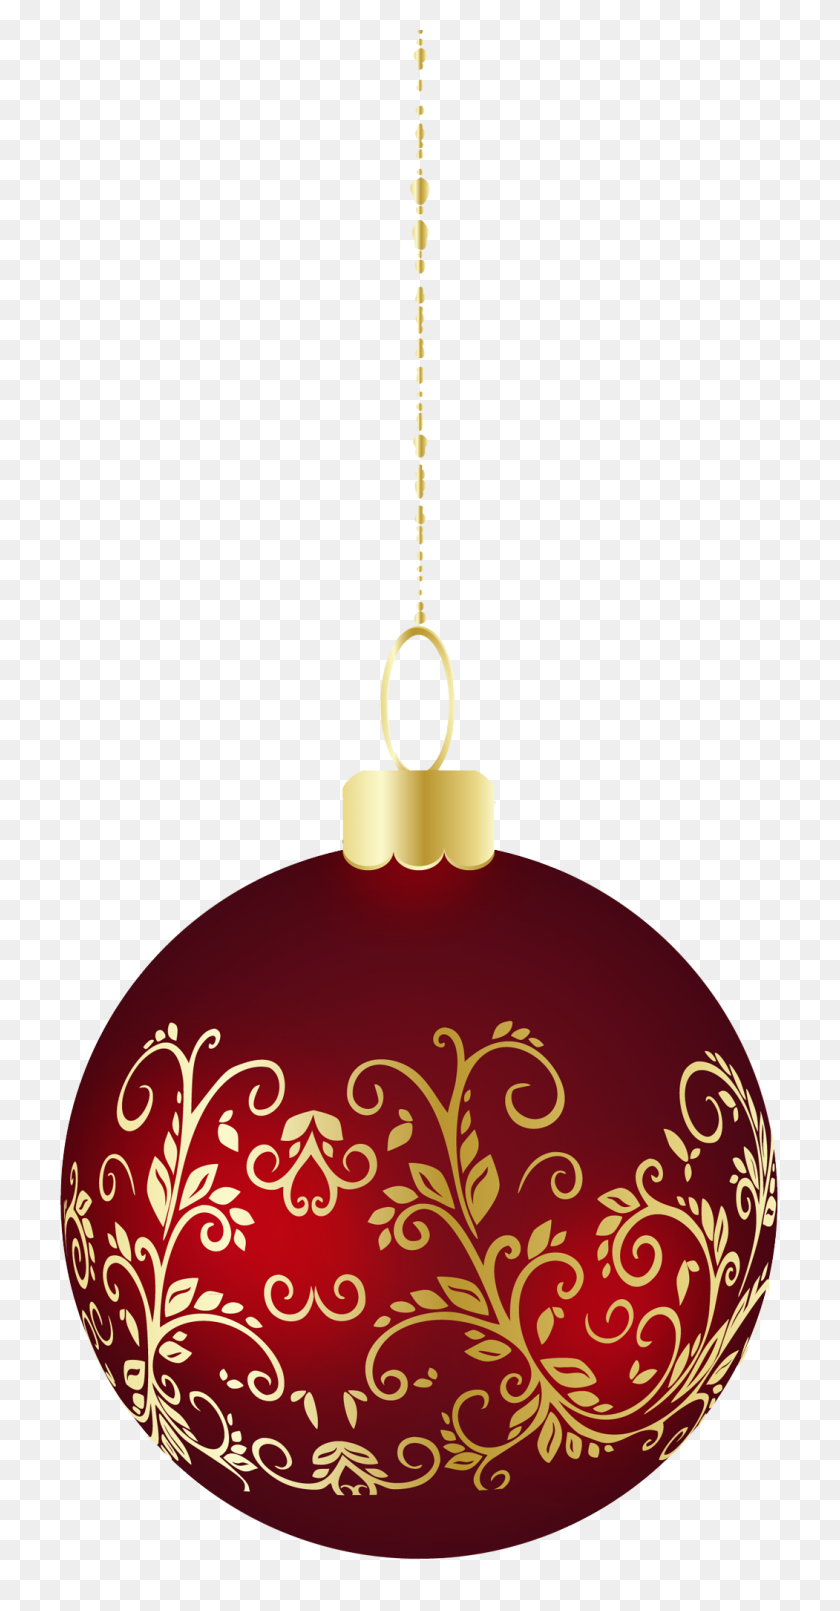 1051x2090 Large Transparent Christmas Ball Ornament Png Gallery - Ornament PNG